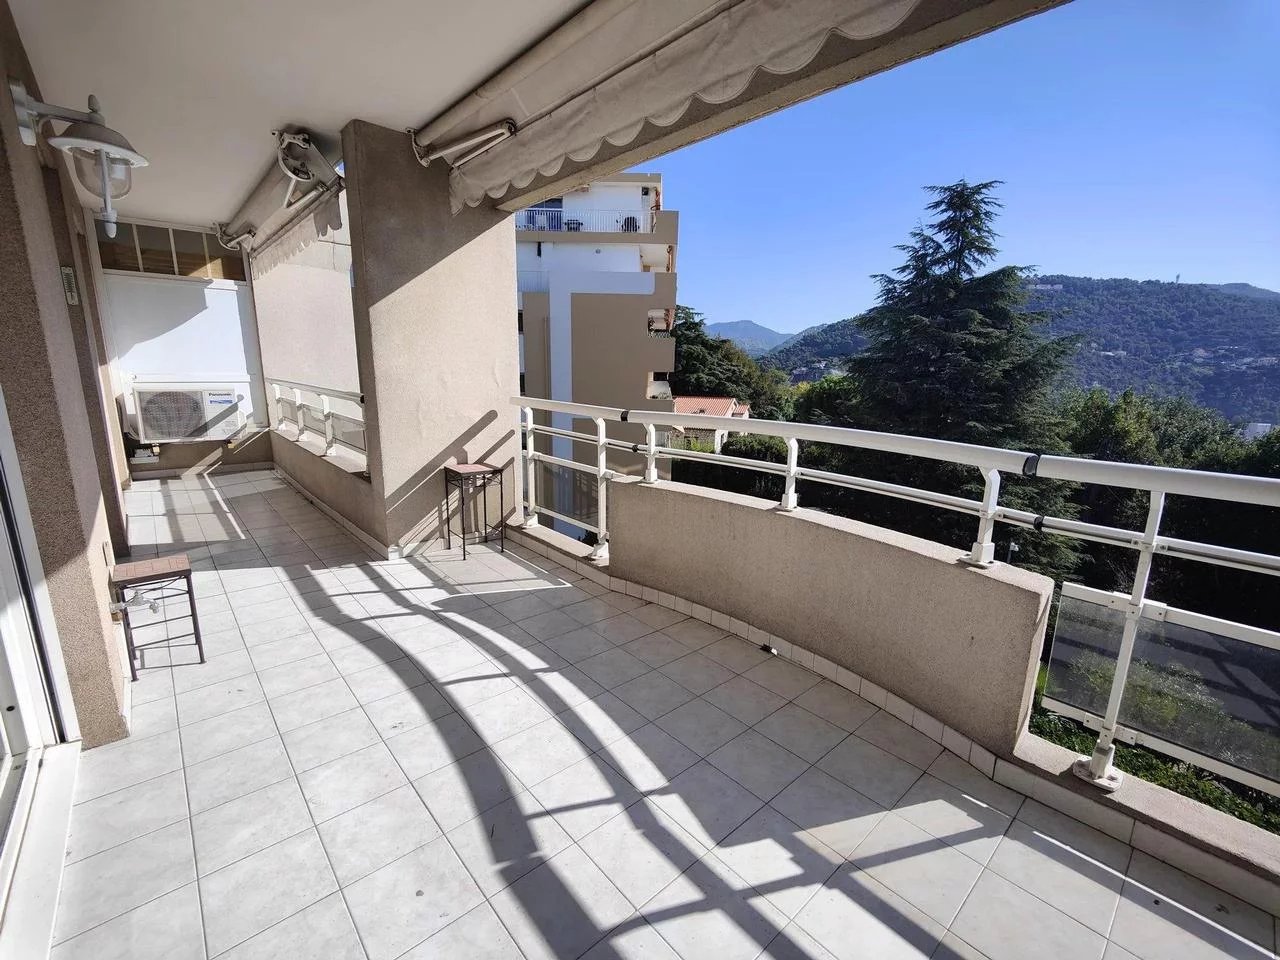 Appartement  2 Rooms 53.32m2  for sale   339 000 €